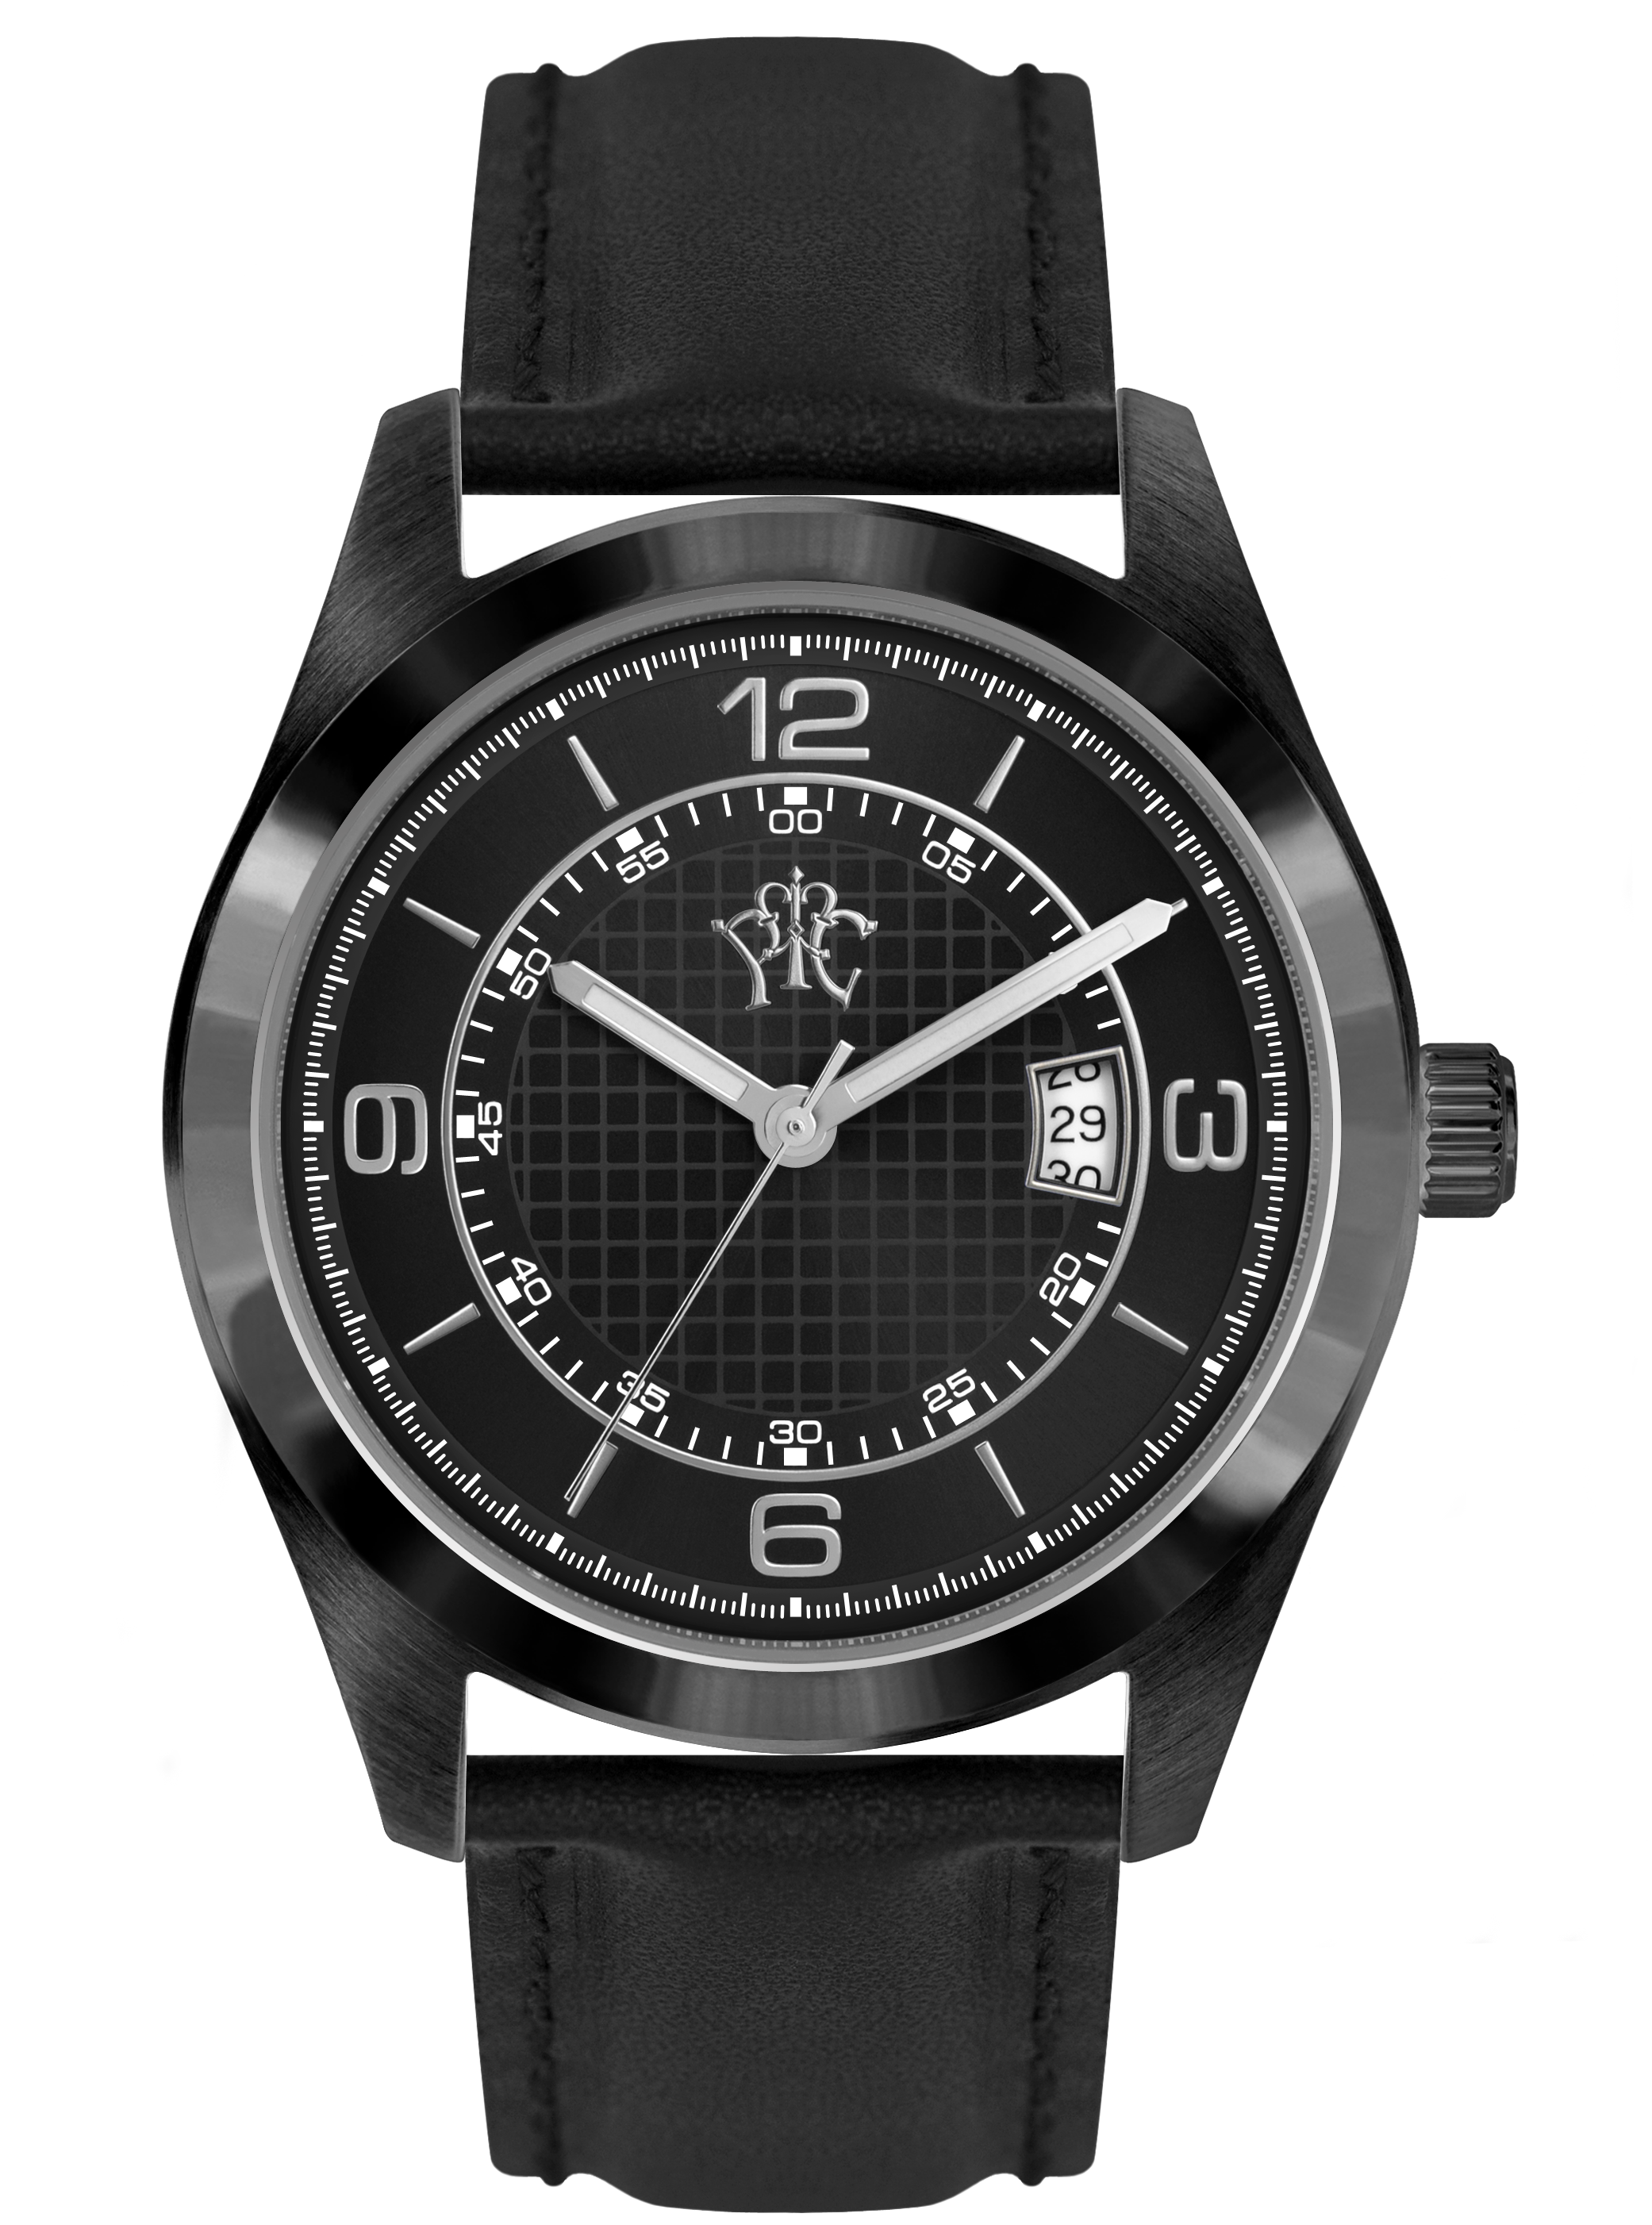 watches PNG image transparent image download, size: 2082x2804px